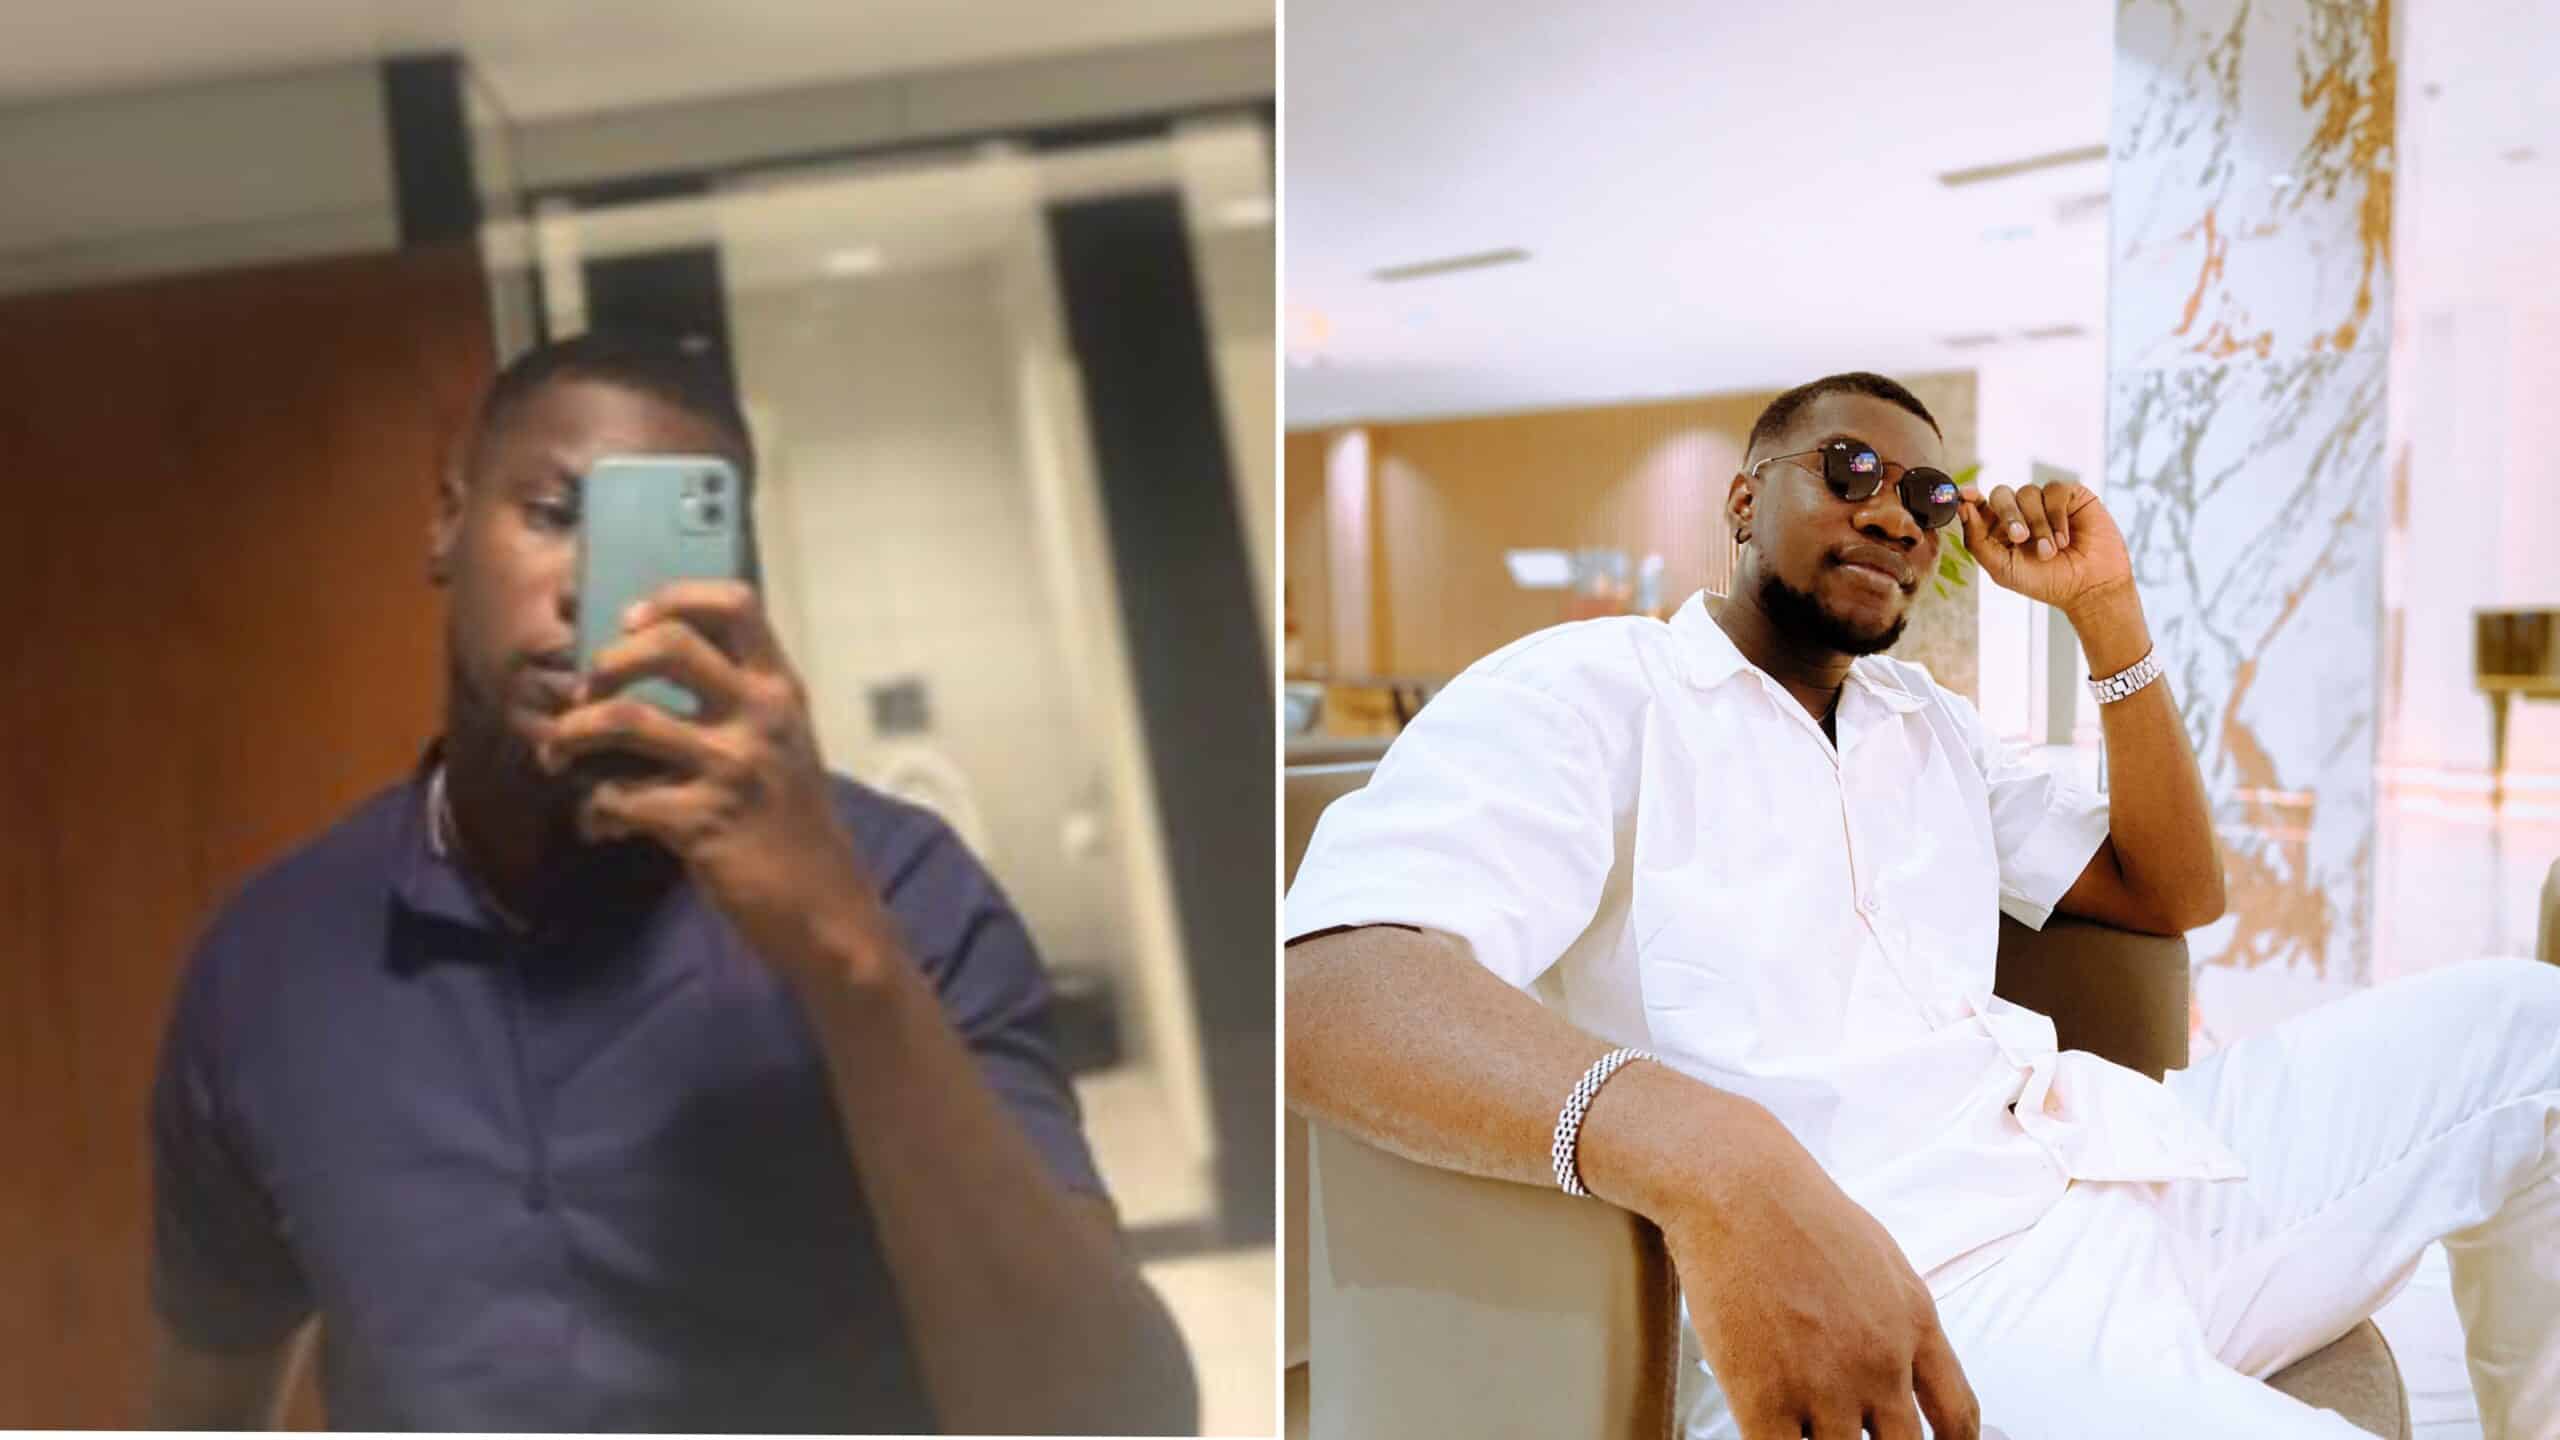 Ladies don't value friendships - Man reveals how his relationship with female friend ended because he didn't order pizza for her